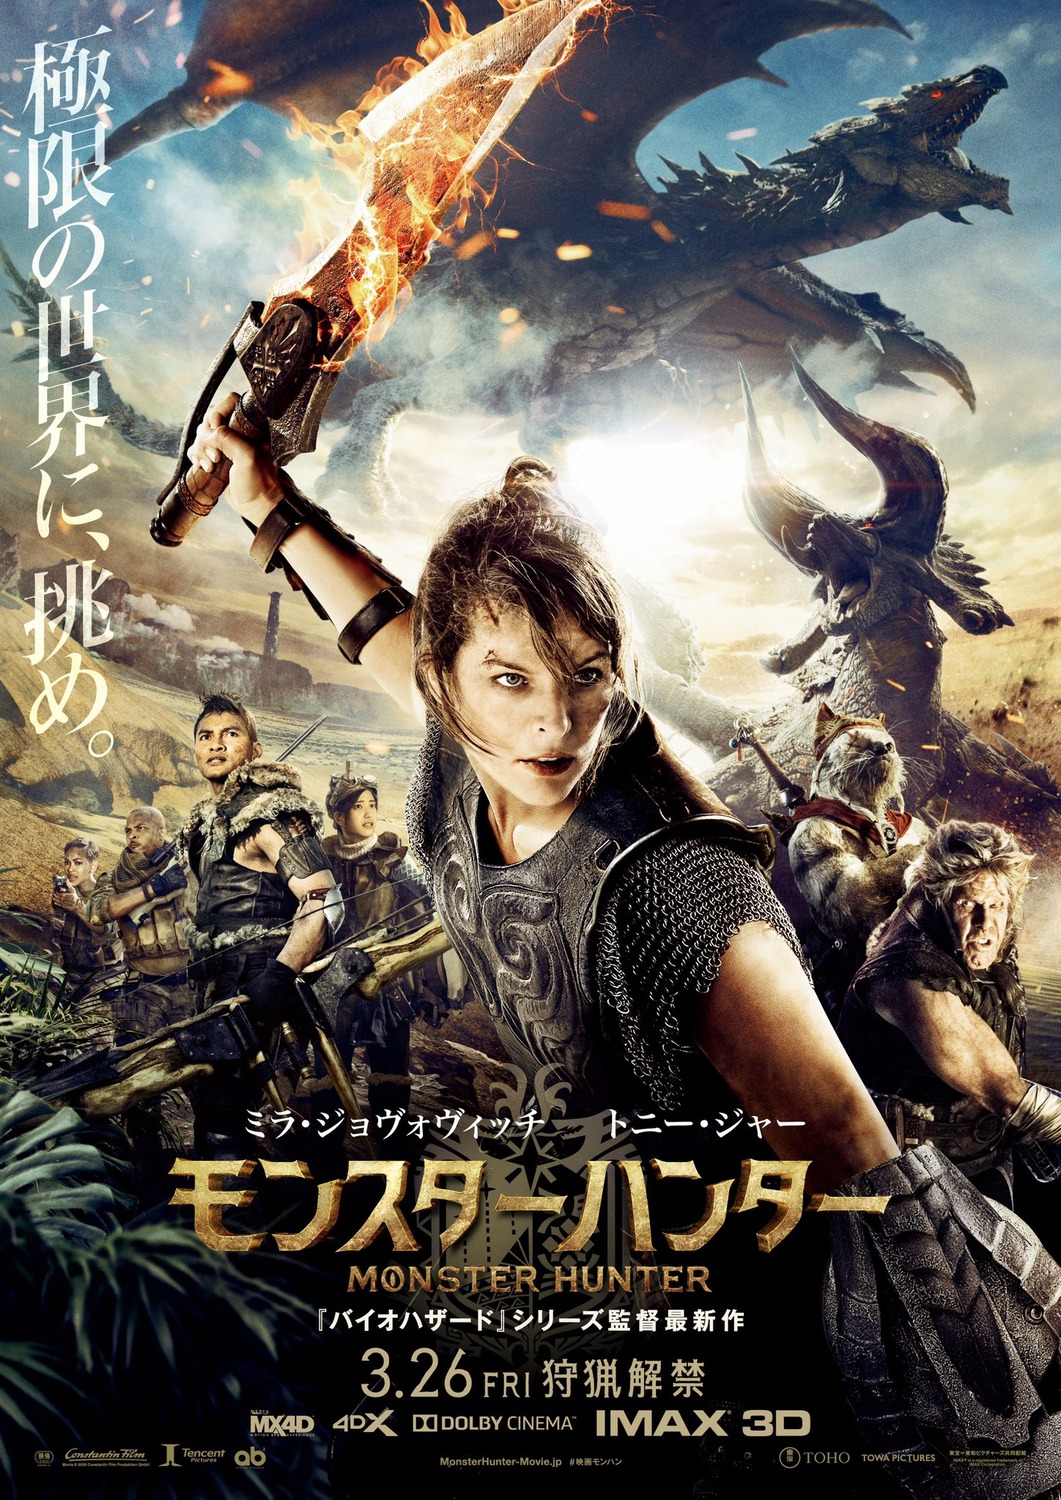 Extra Large Movie Poster Image for Monster Hunter (#15 of 15)